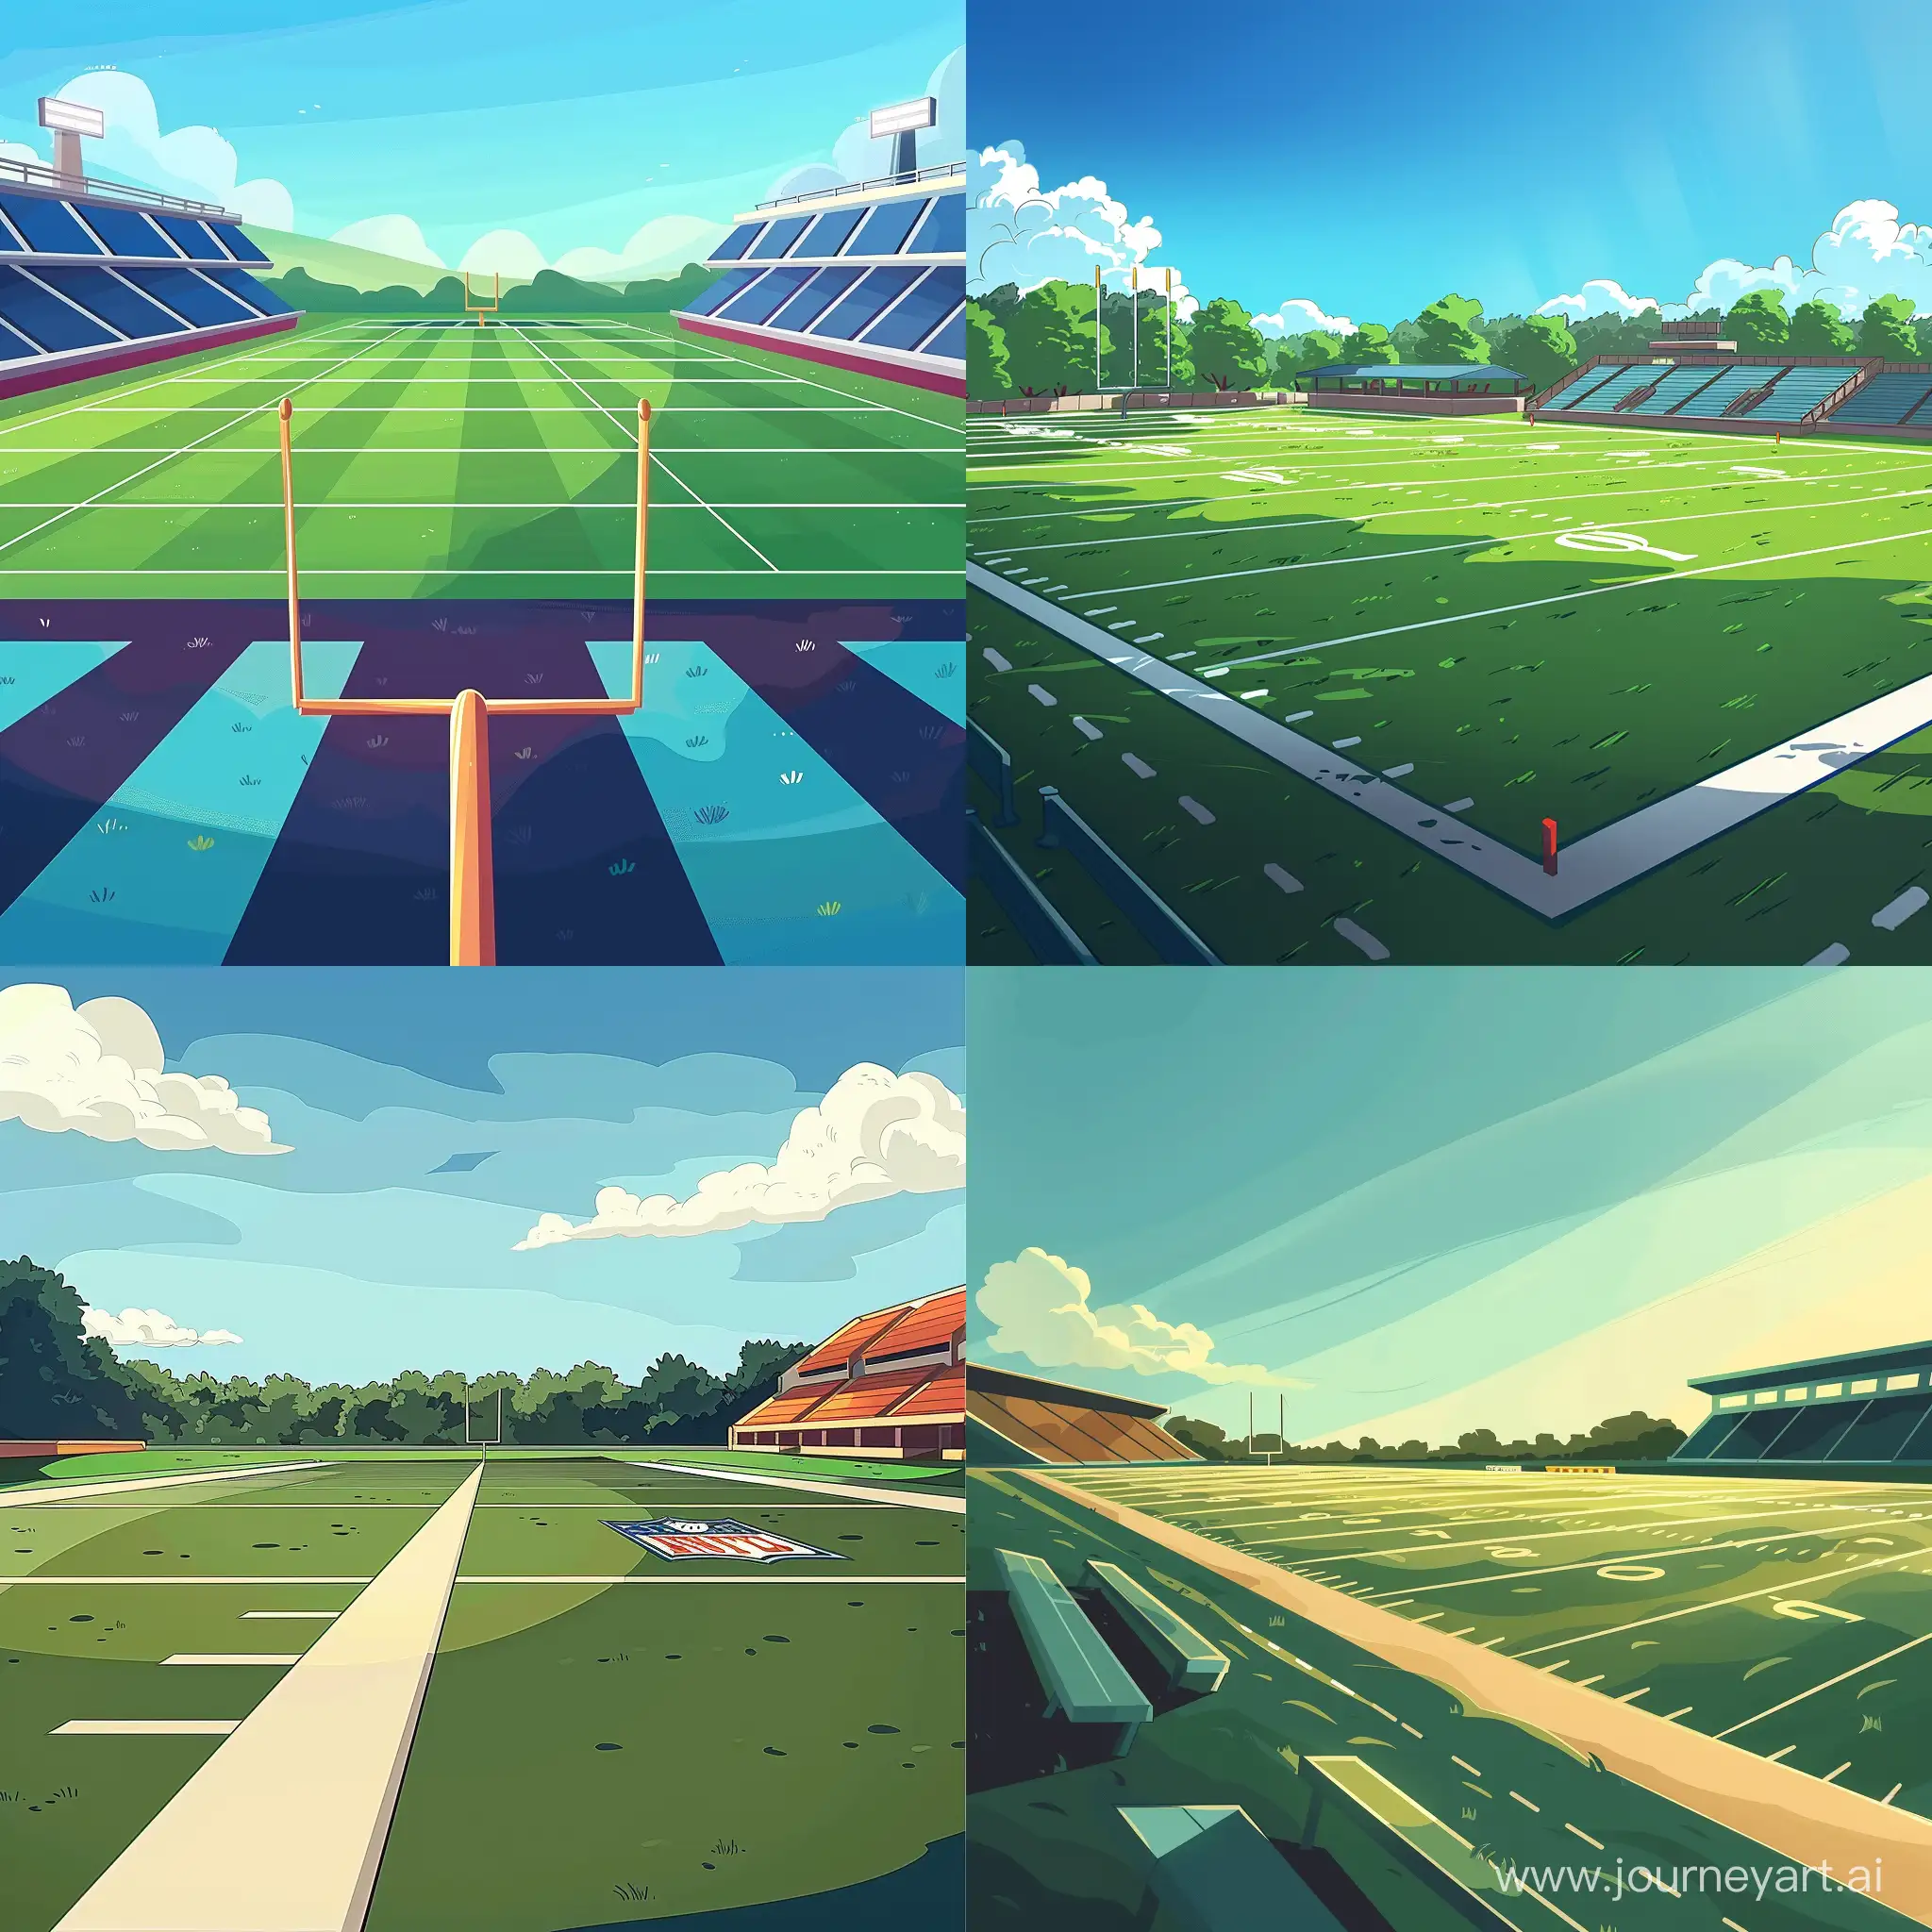 A two-dimensional cartoon football field from a side view.":: --aspect 1:1 --version 6 --quality 1 